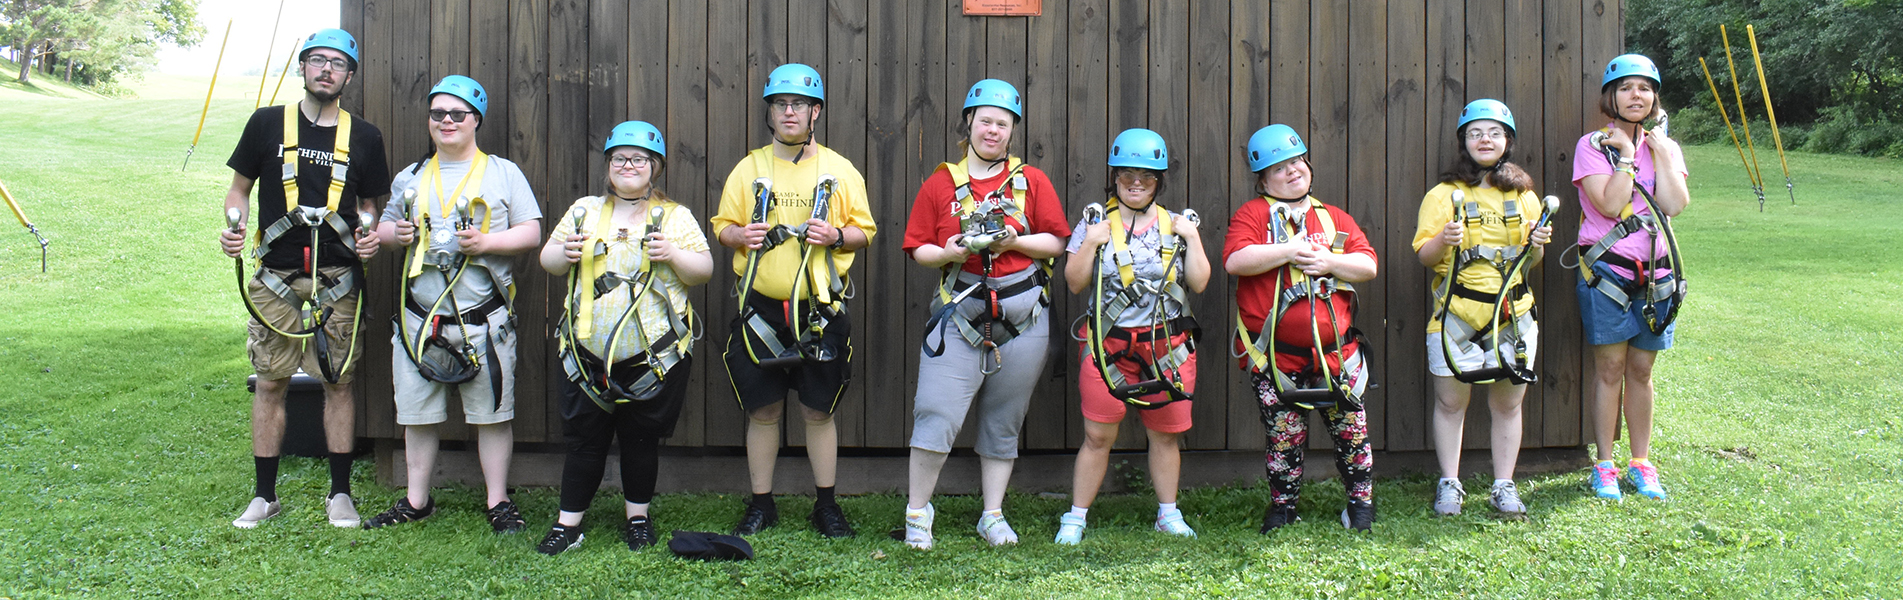 Ready for the Ropes Course